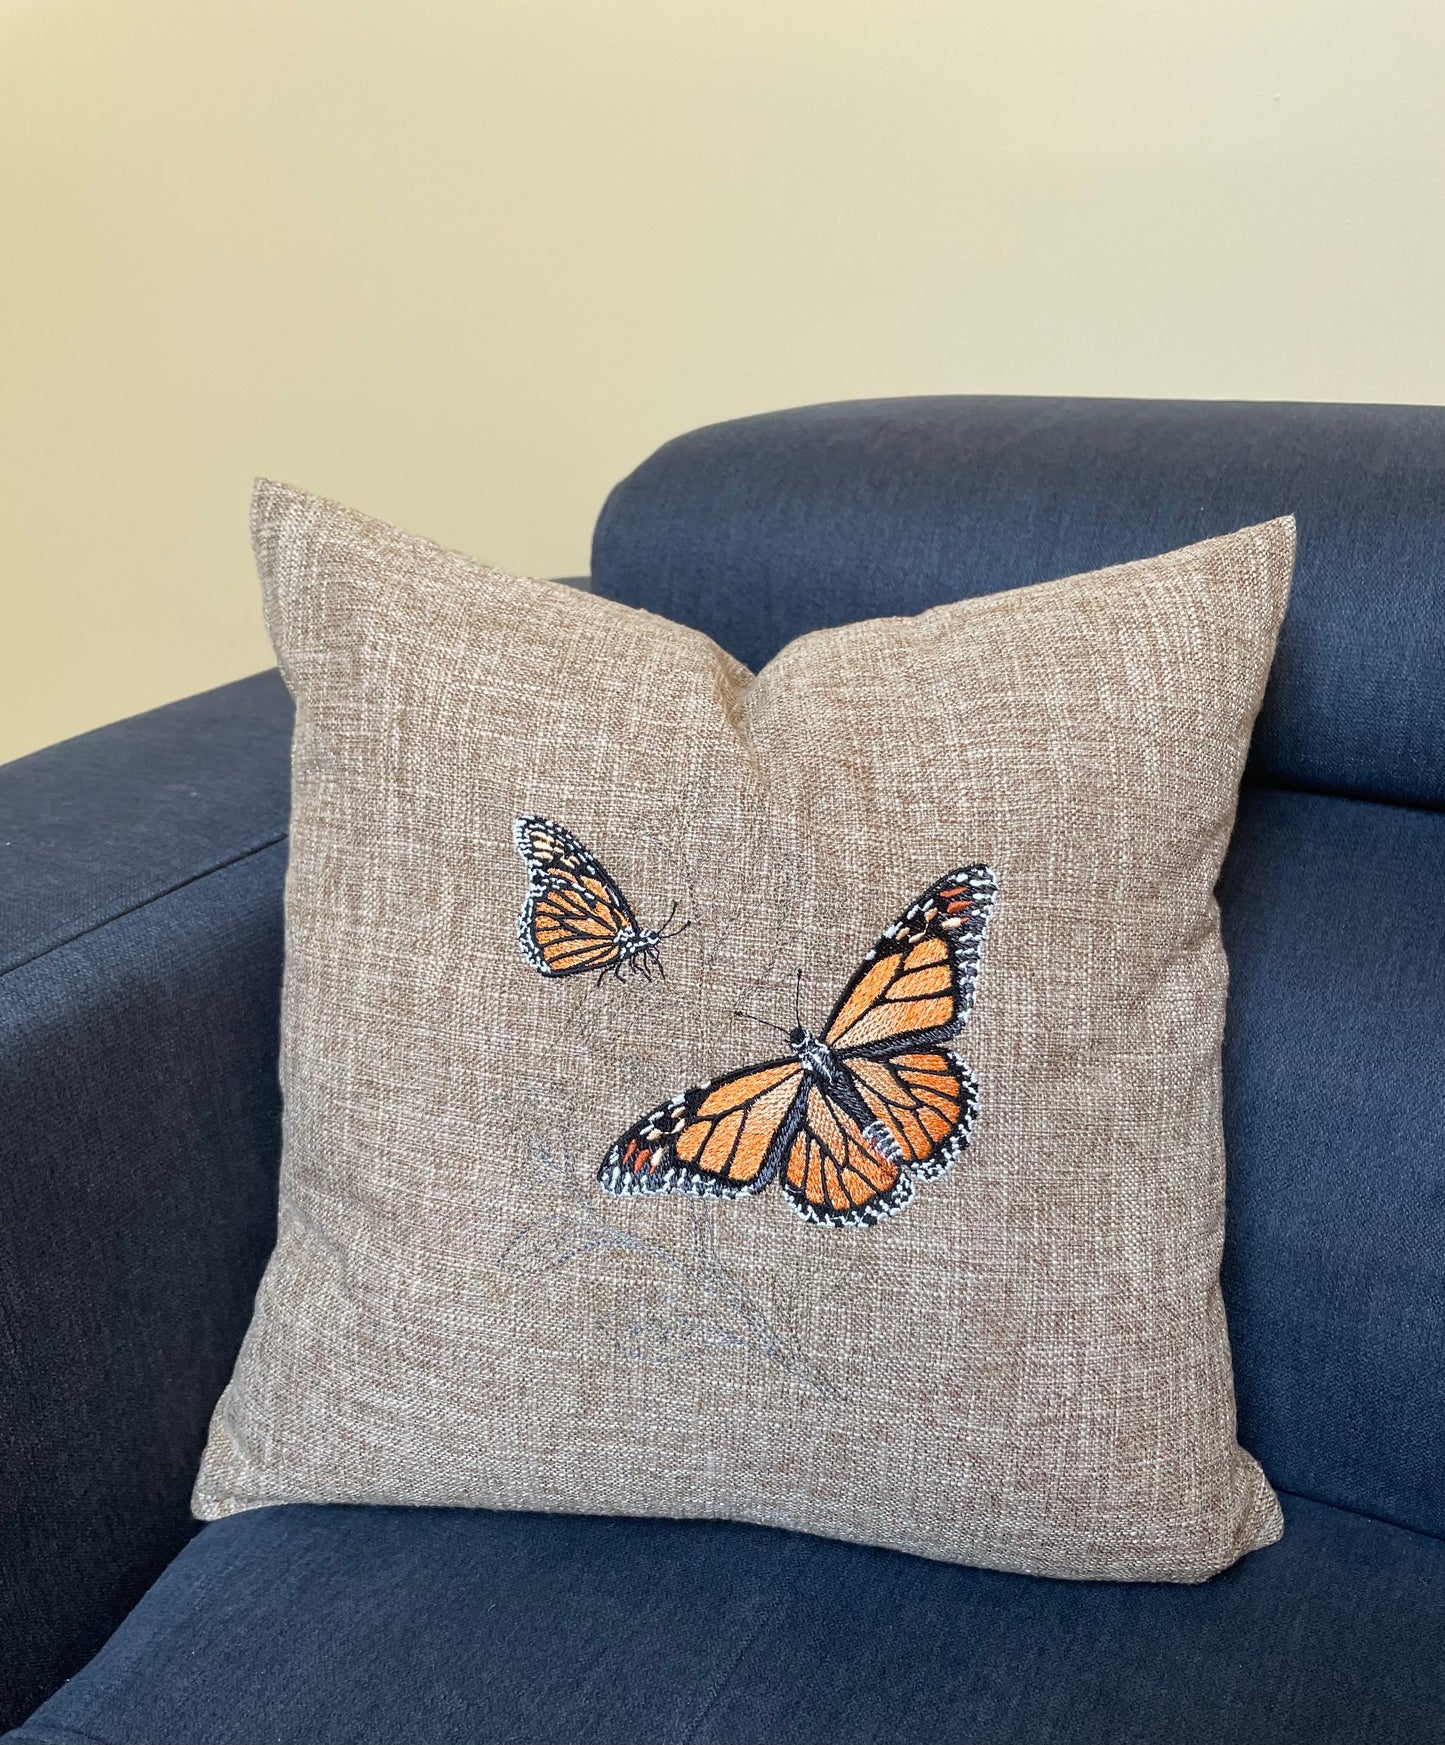 Monarch Butterfly Embroidered Throw Pillow Cover 16" x 16" Cotton